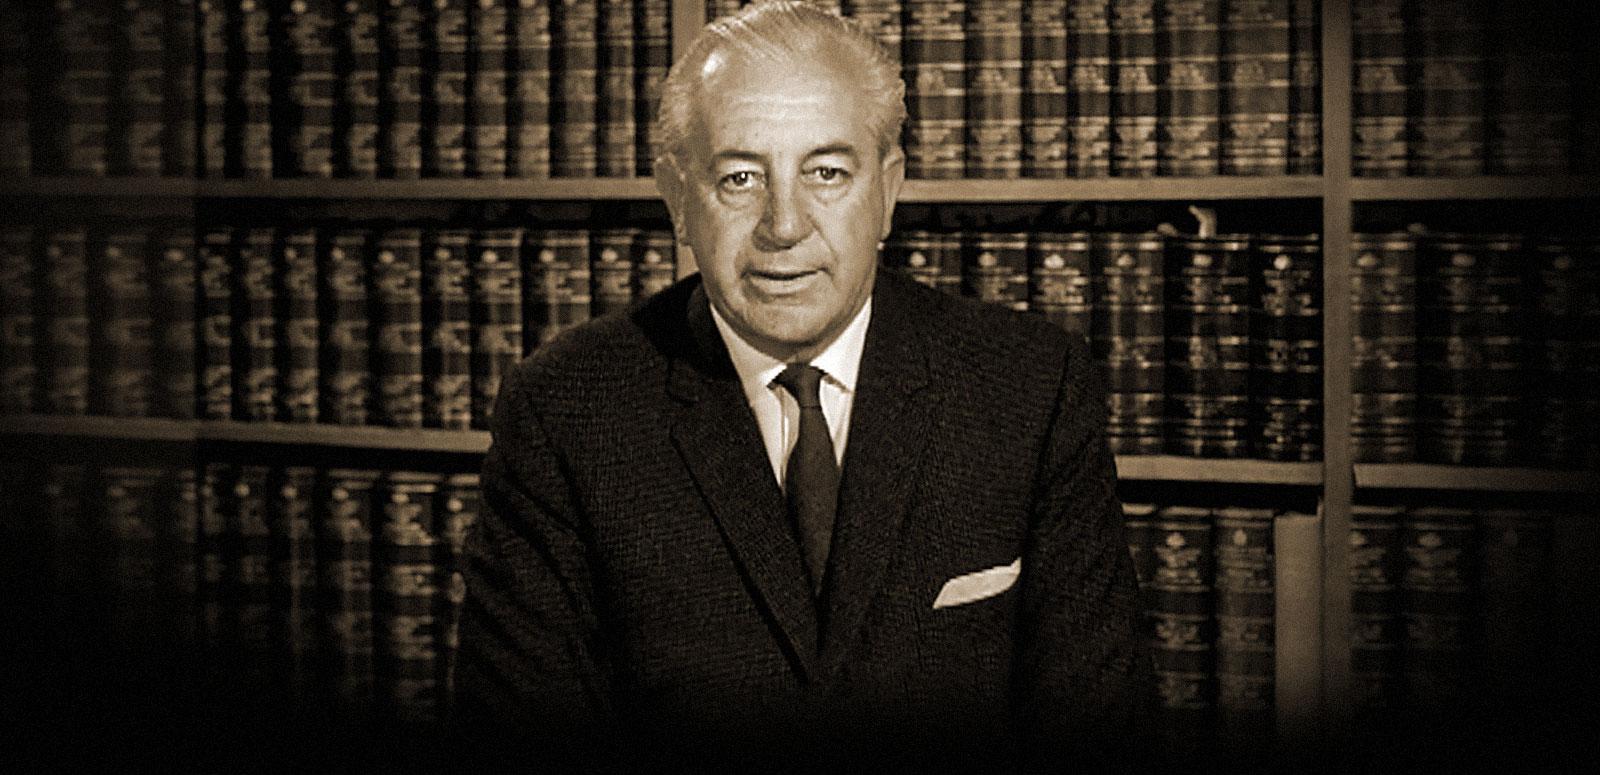 A sepia image of Harold Holt as federal treasurer, seated behind a desk and recording an address to the nation